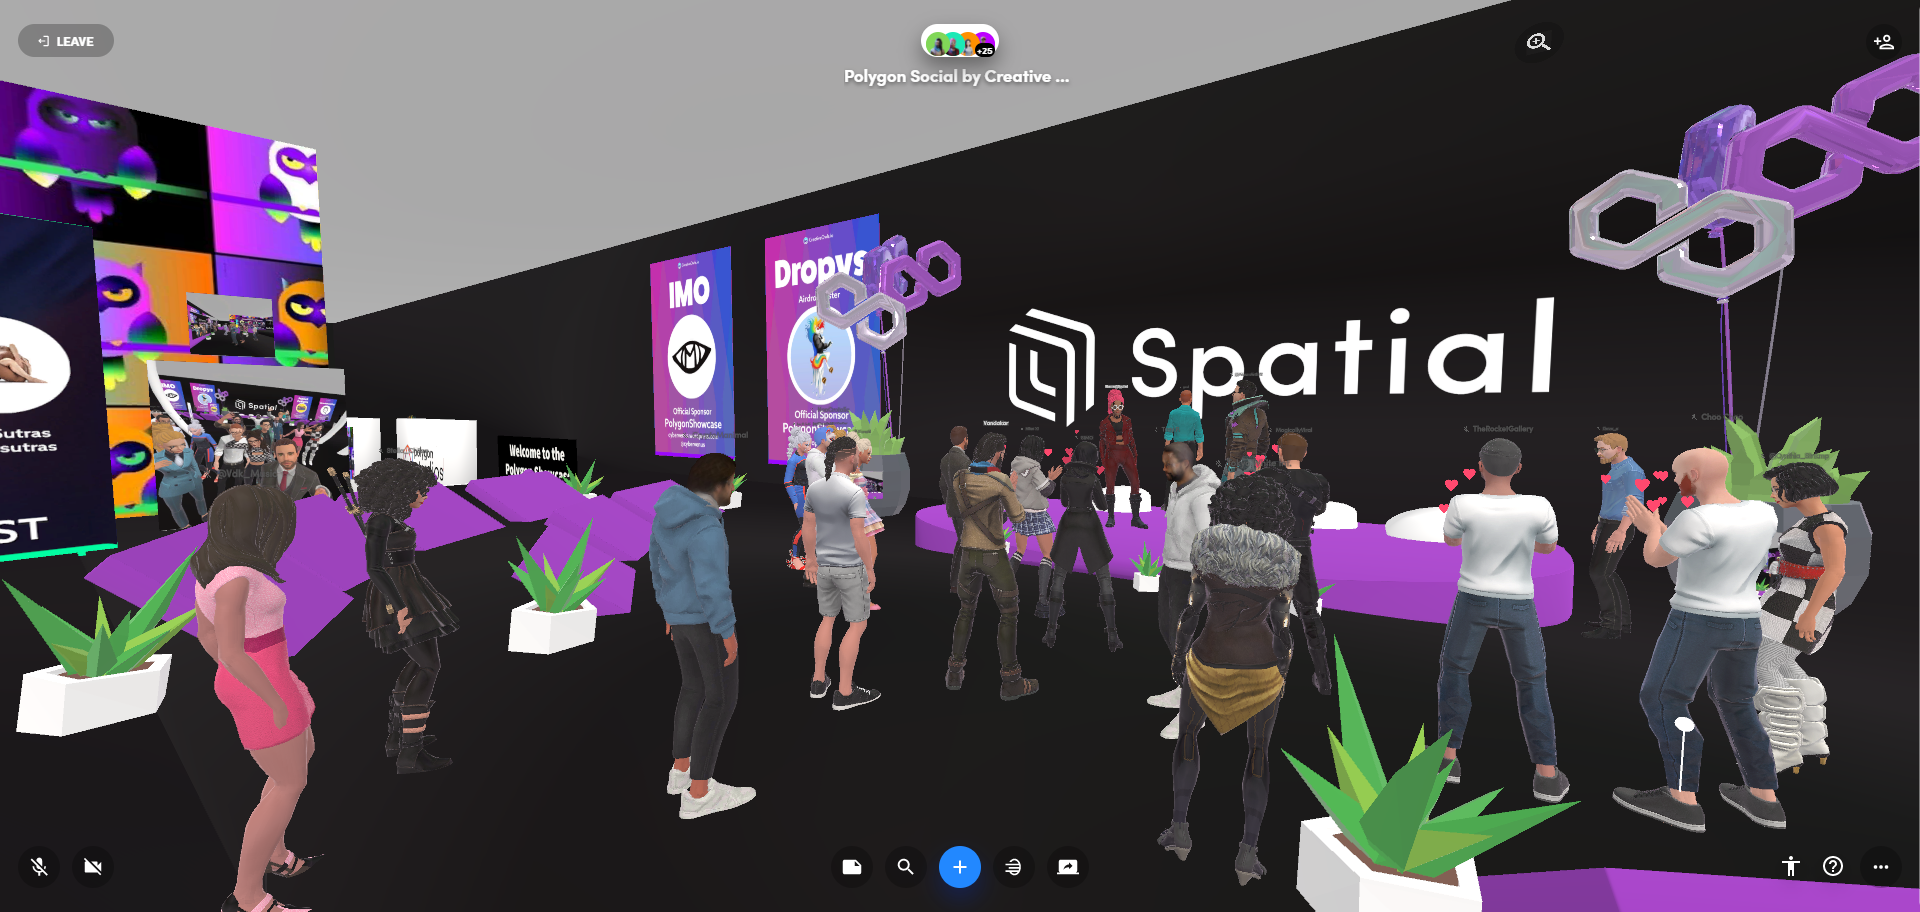 10 Tips for Hosting Events in the Metaverse